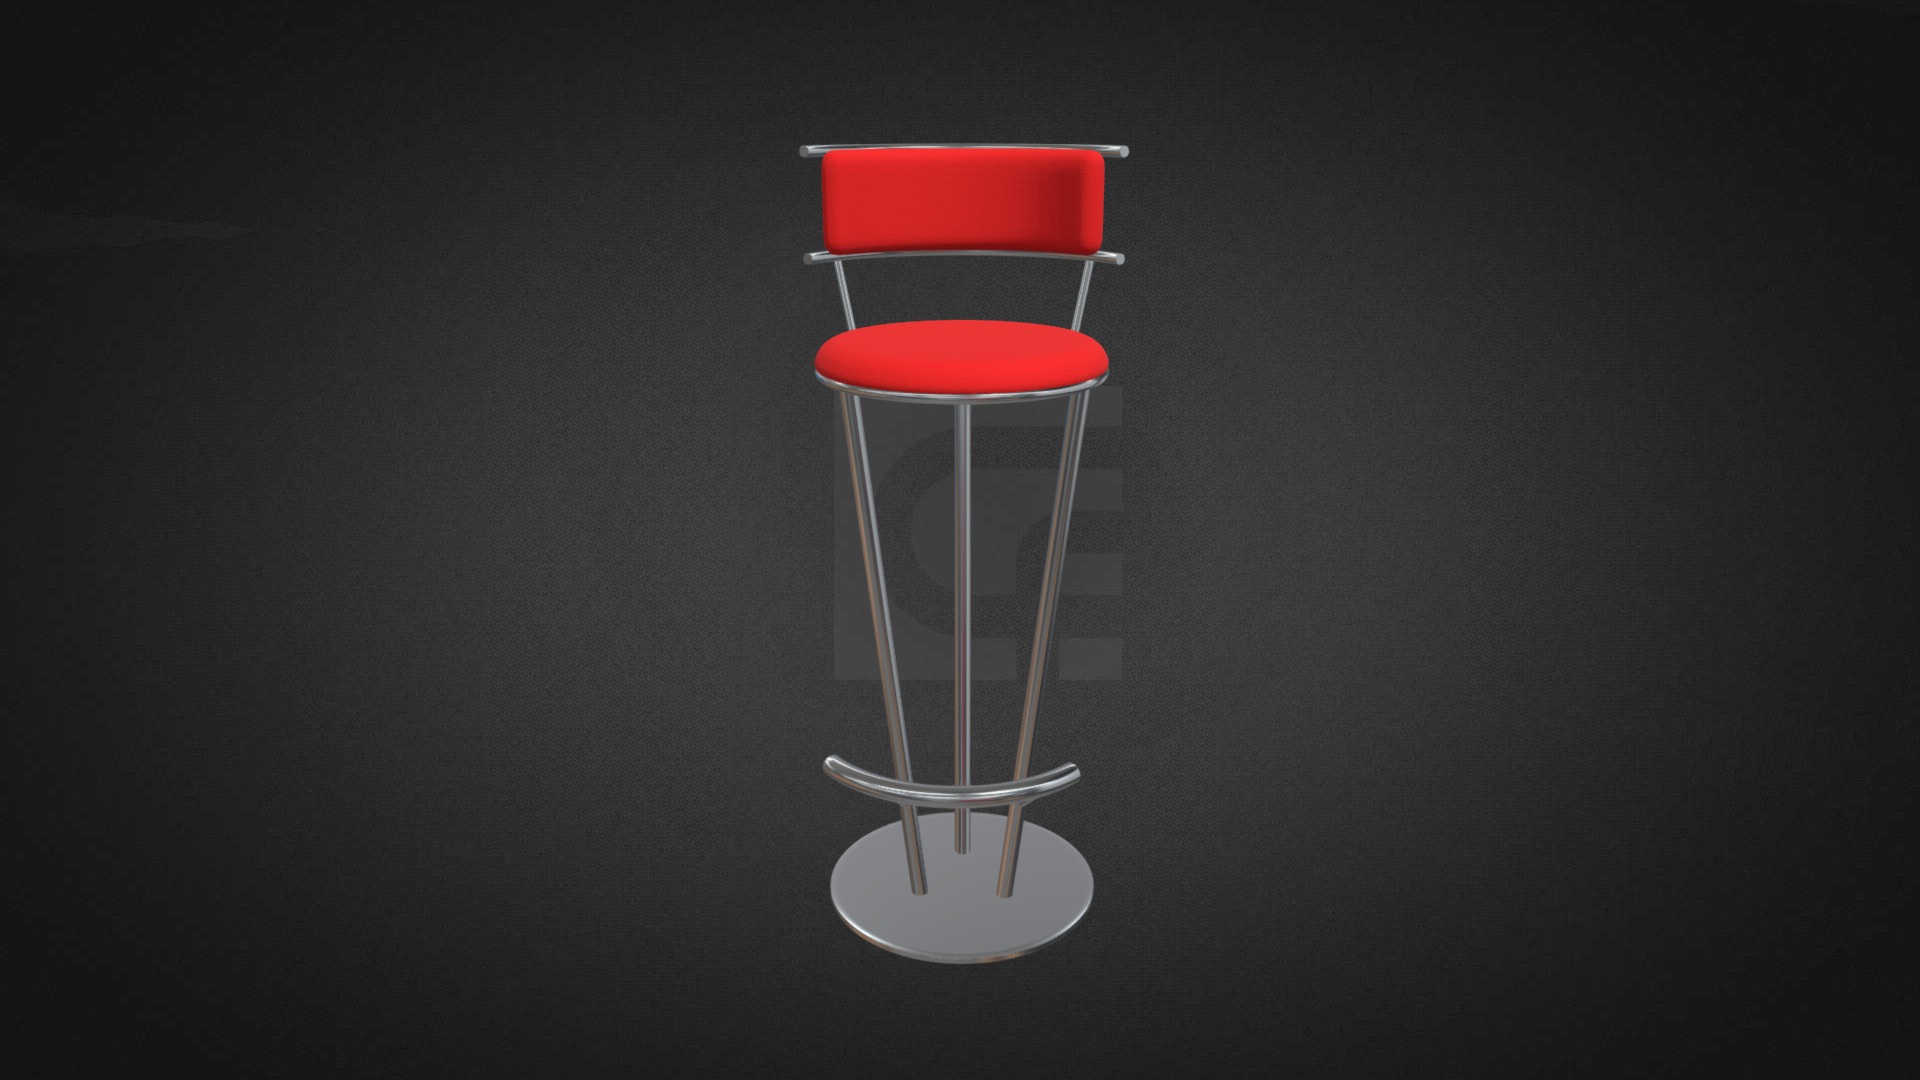 3D model Farno Stool with back Hire - This is a 3D model of the Farno Stool with back Hire. The 3D model is about a chair with a red cushion.